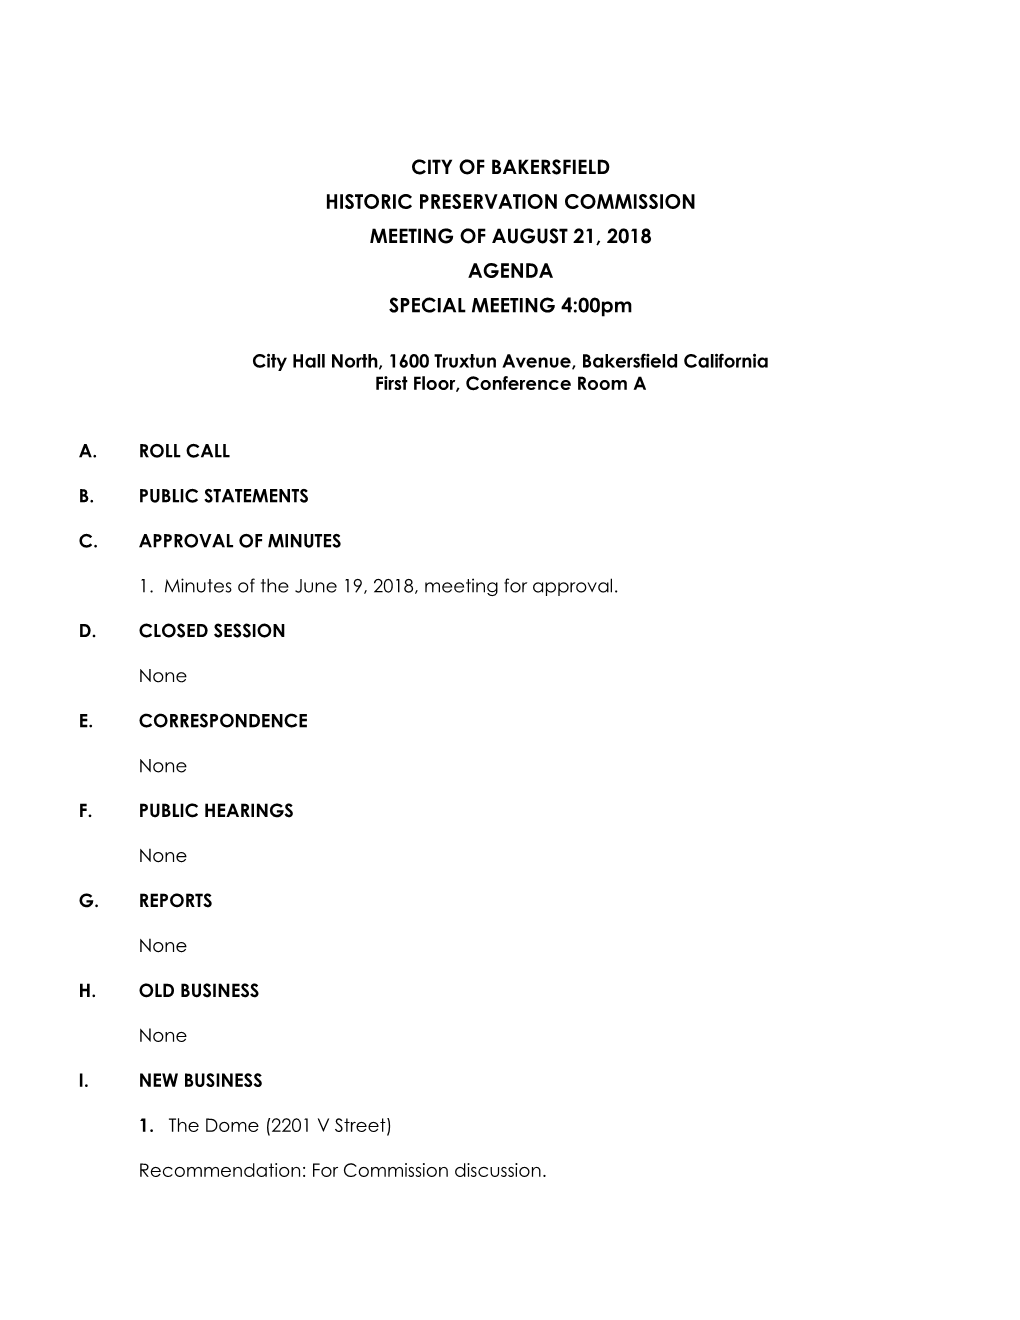 CITY of BAKERSFIELD HISTORIC PRESERVATION COMMISSION MEETING of AUGUST 21, 2018 AGENDA SPECIAL MEETING 4:00Pm